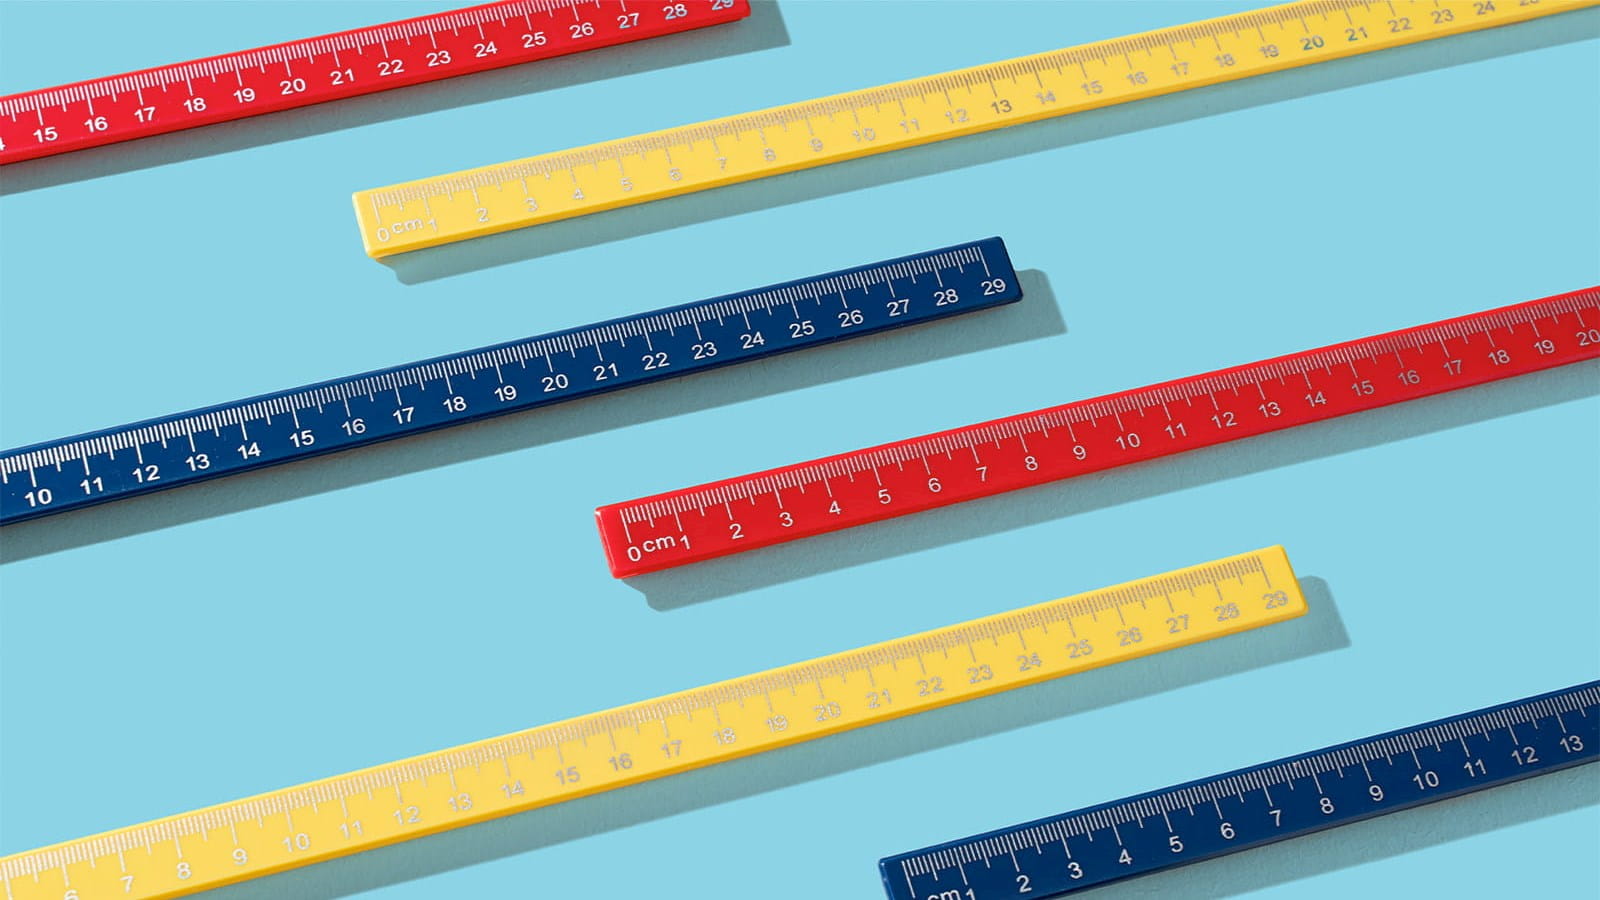 primary colour rulers yellow red navy blue sat parallel on a light blue background